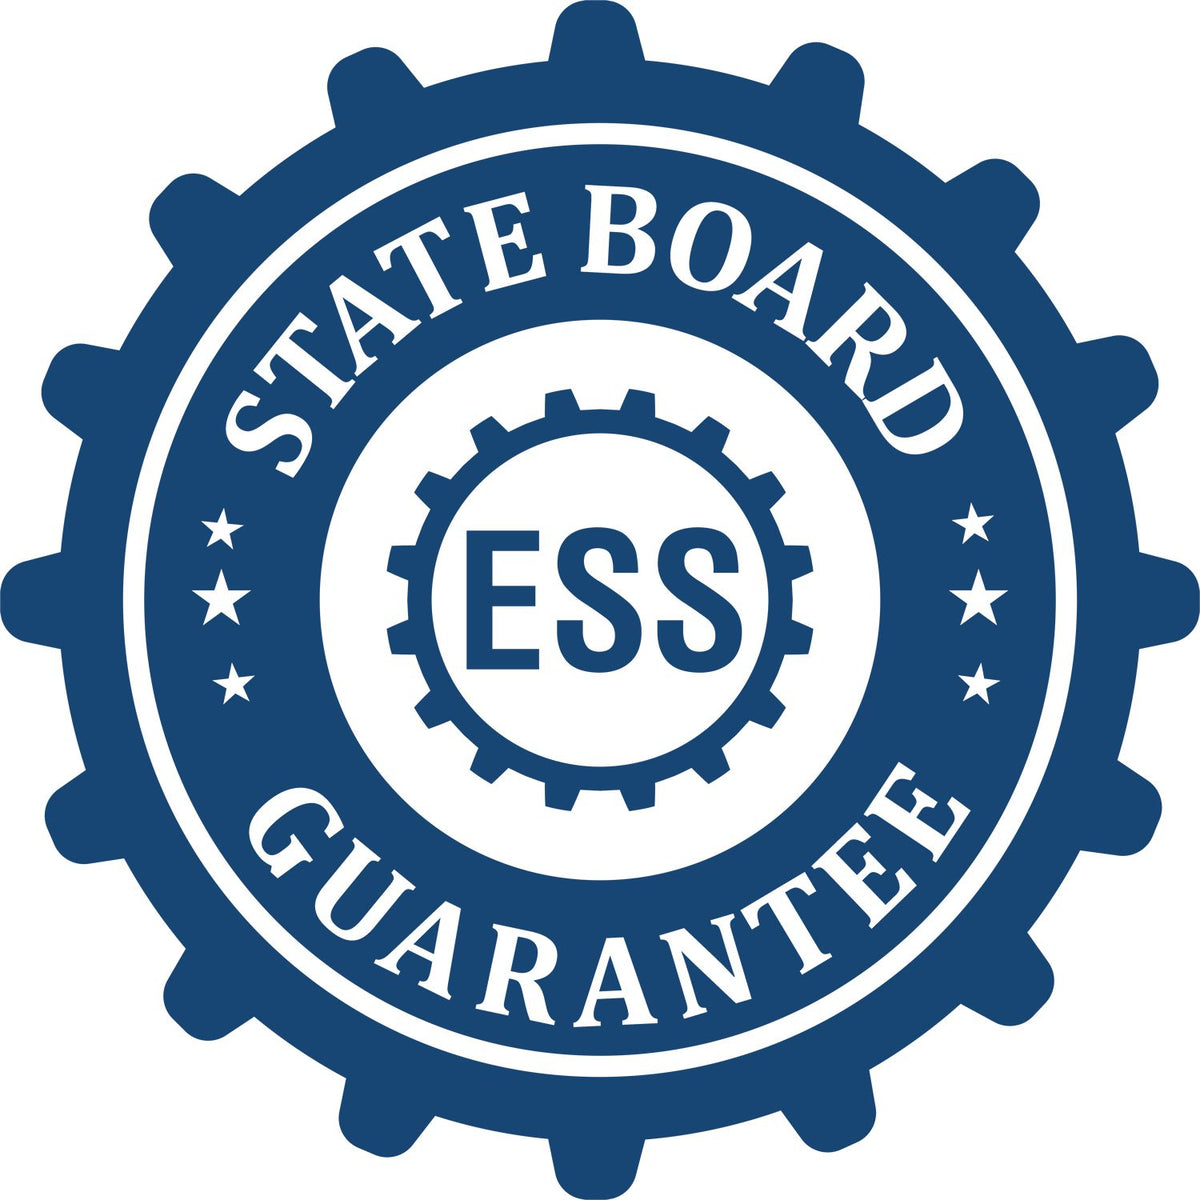 An emblem in a gear shape illustrating a state board guarantee for the Gift Montana Engineer Seal